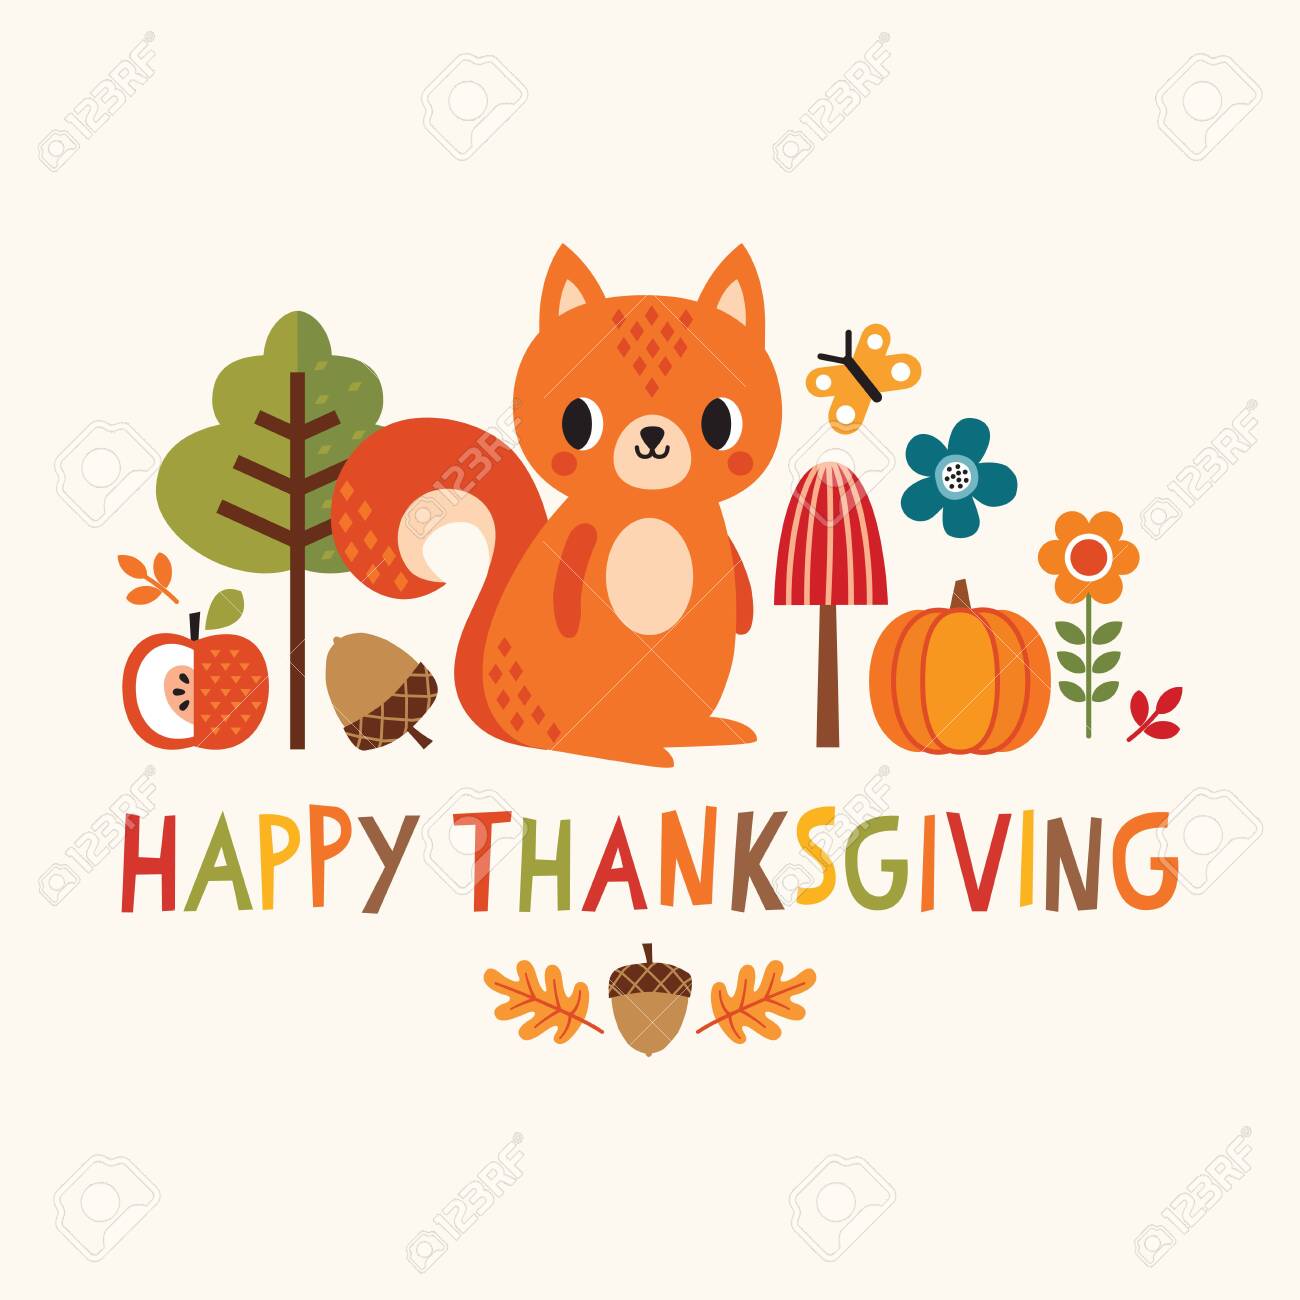 Vector Happy Thanksgiving card with cute squirrel and autumn elements